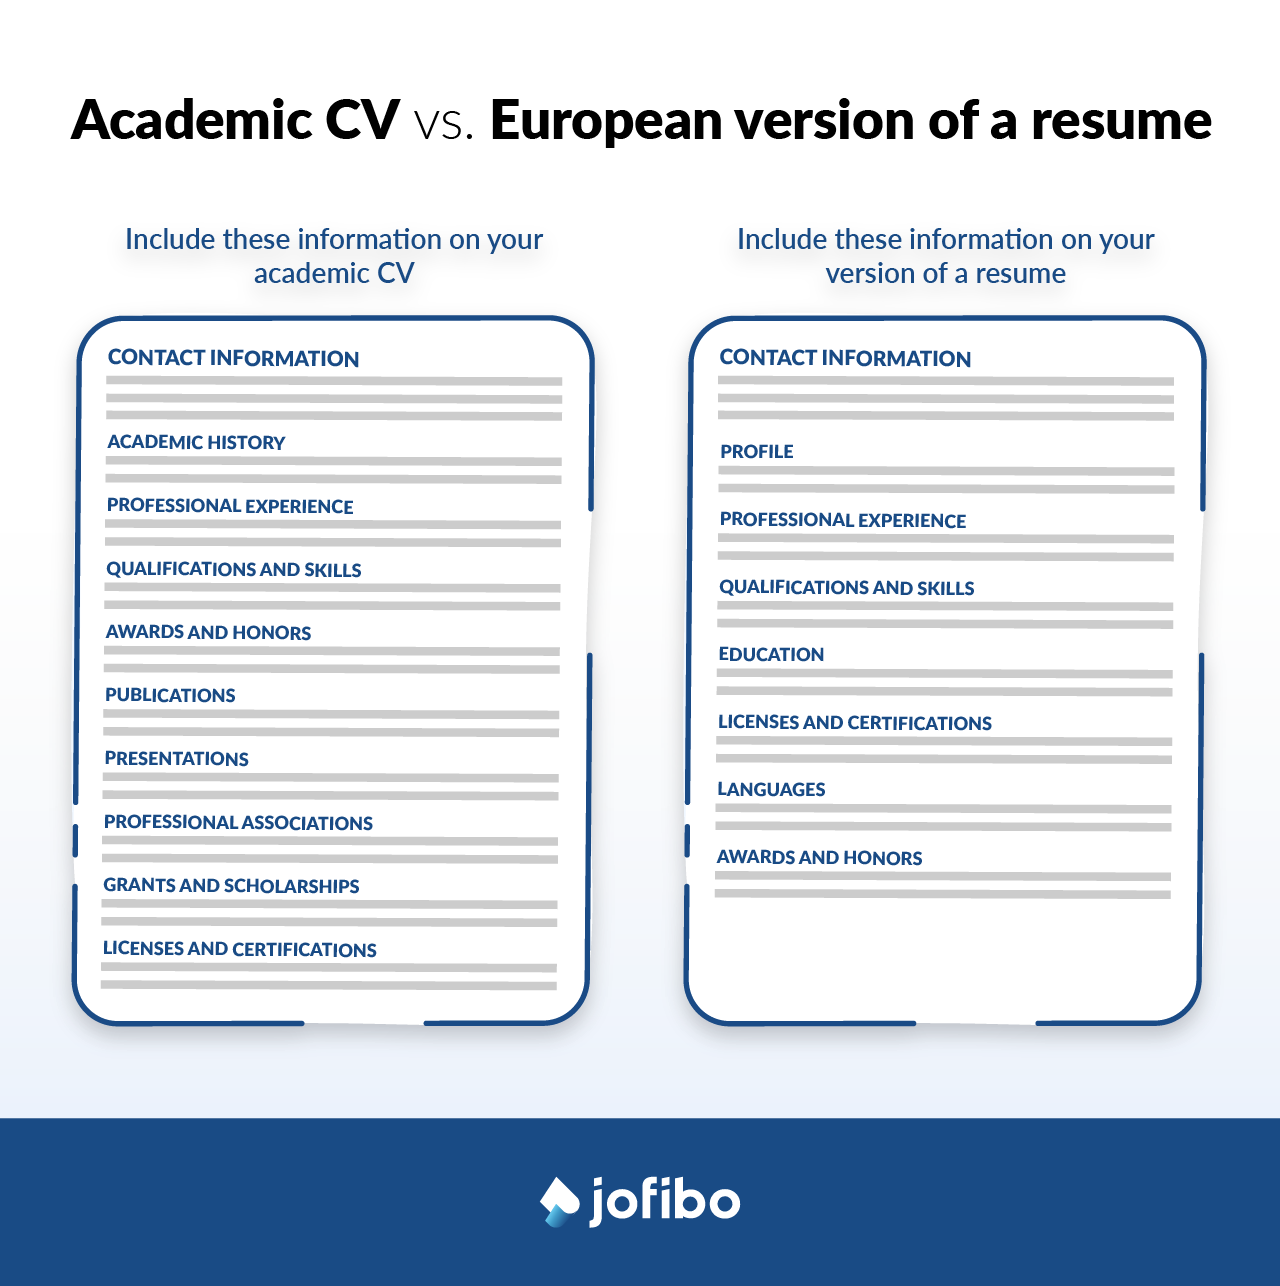 Differences between an academic CV and a European version of a resume